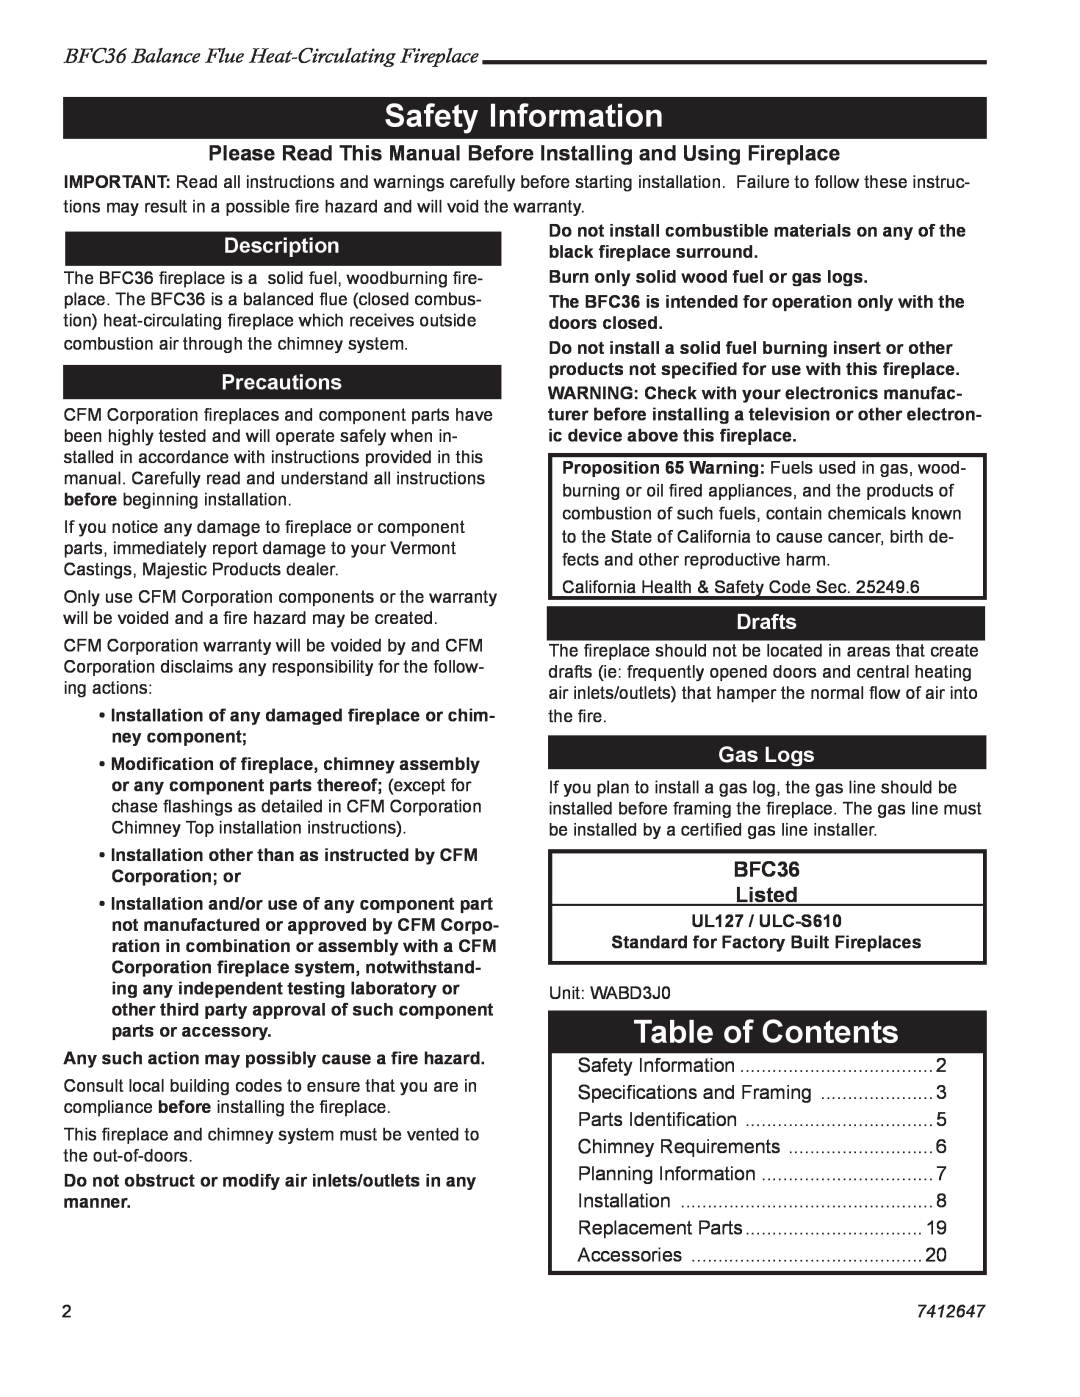 Vermont Casting manual Safety Information, Table of Contents, BFC36 Balance Flue Heat-CirculatingFireplace, Description 